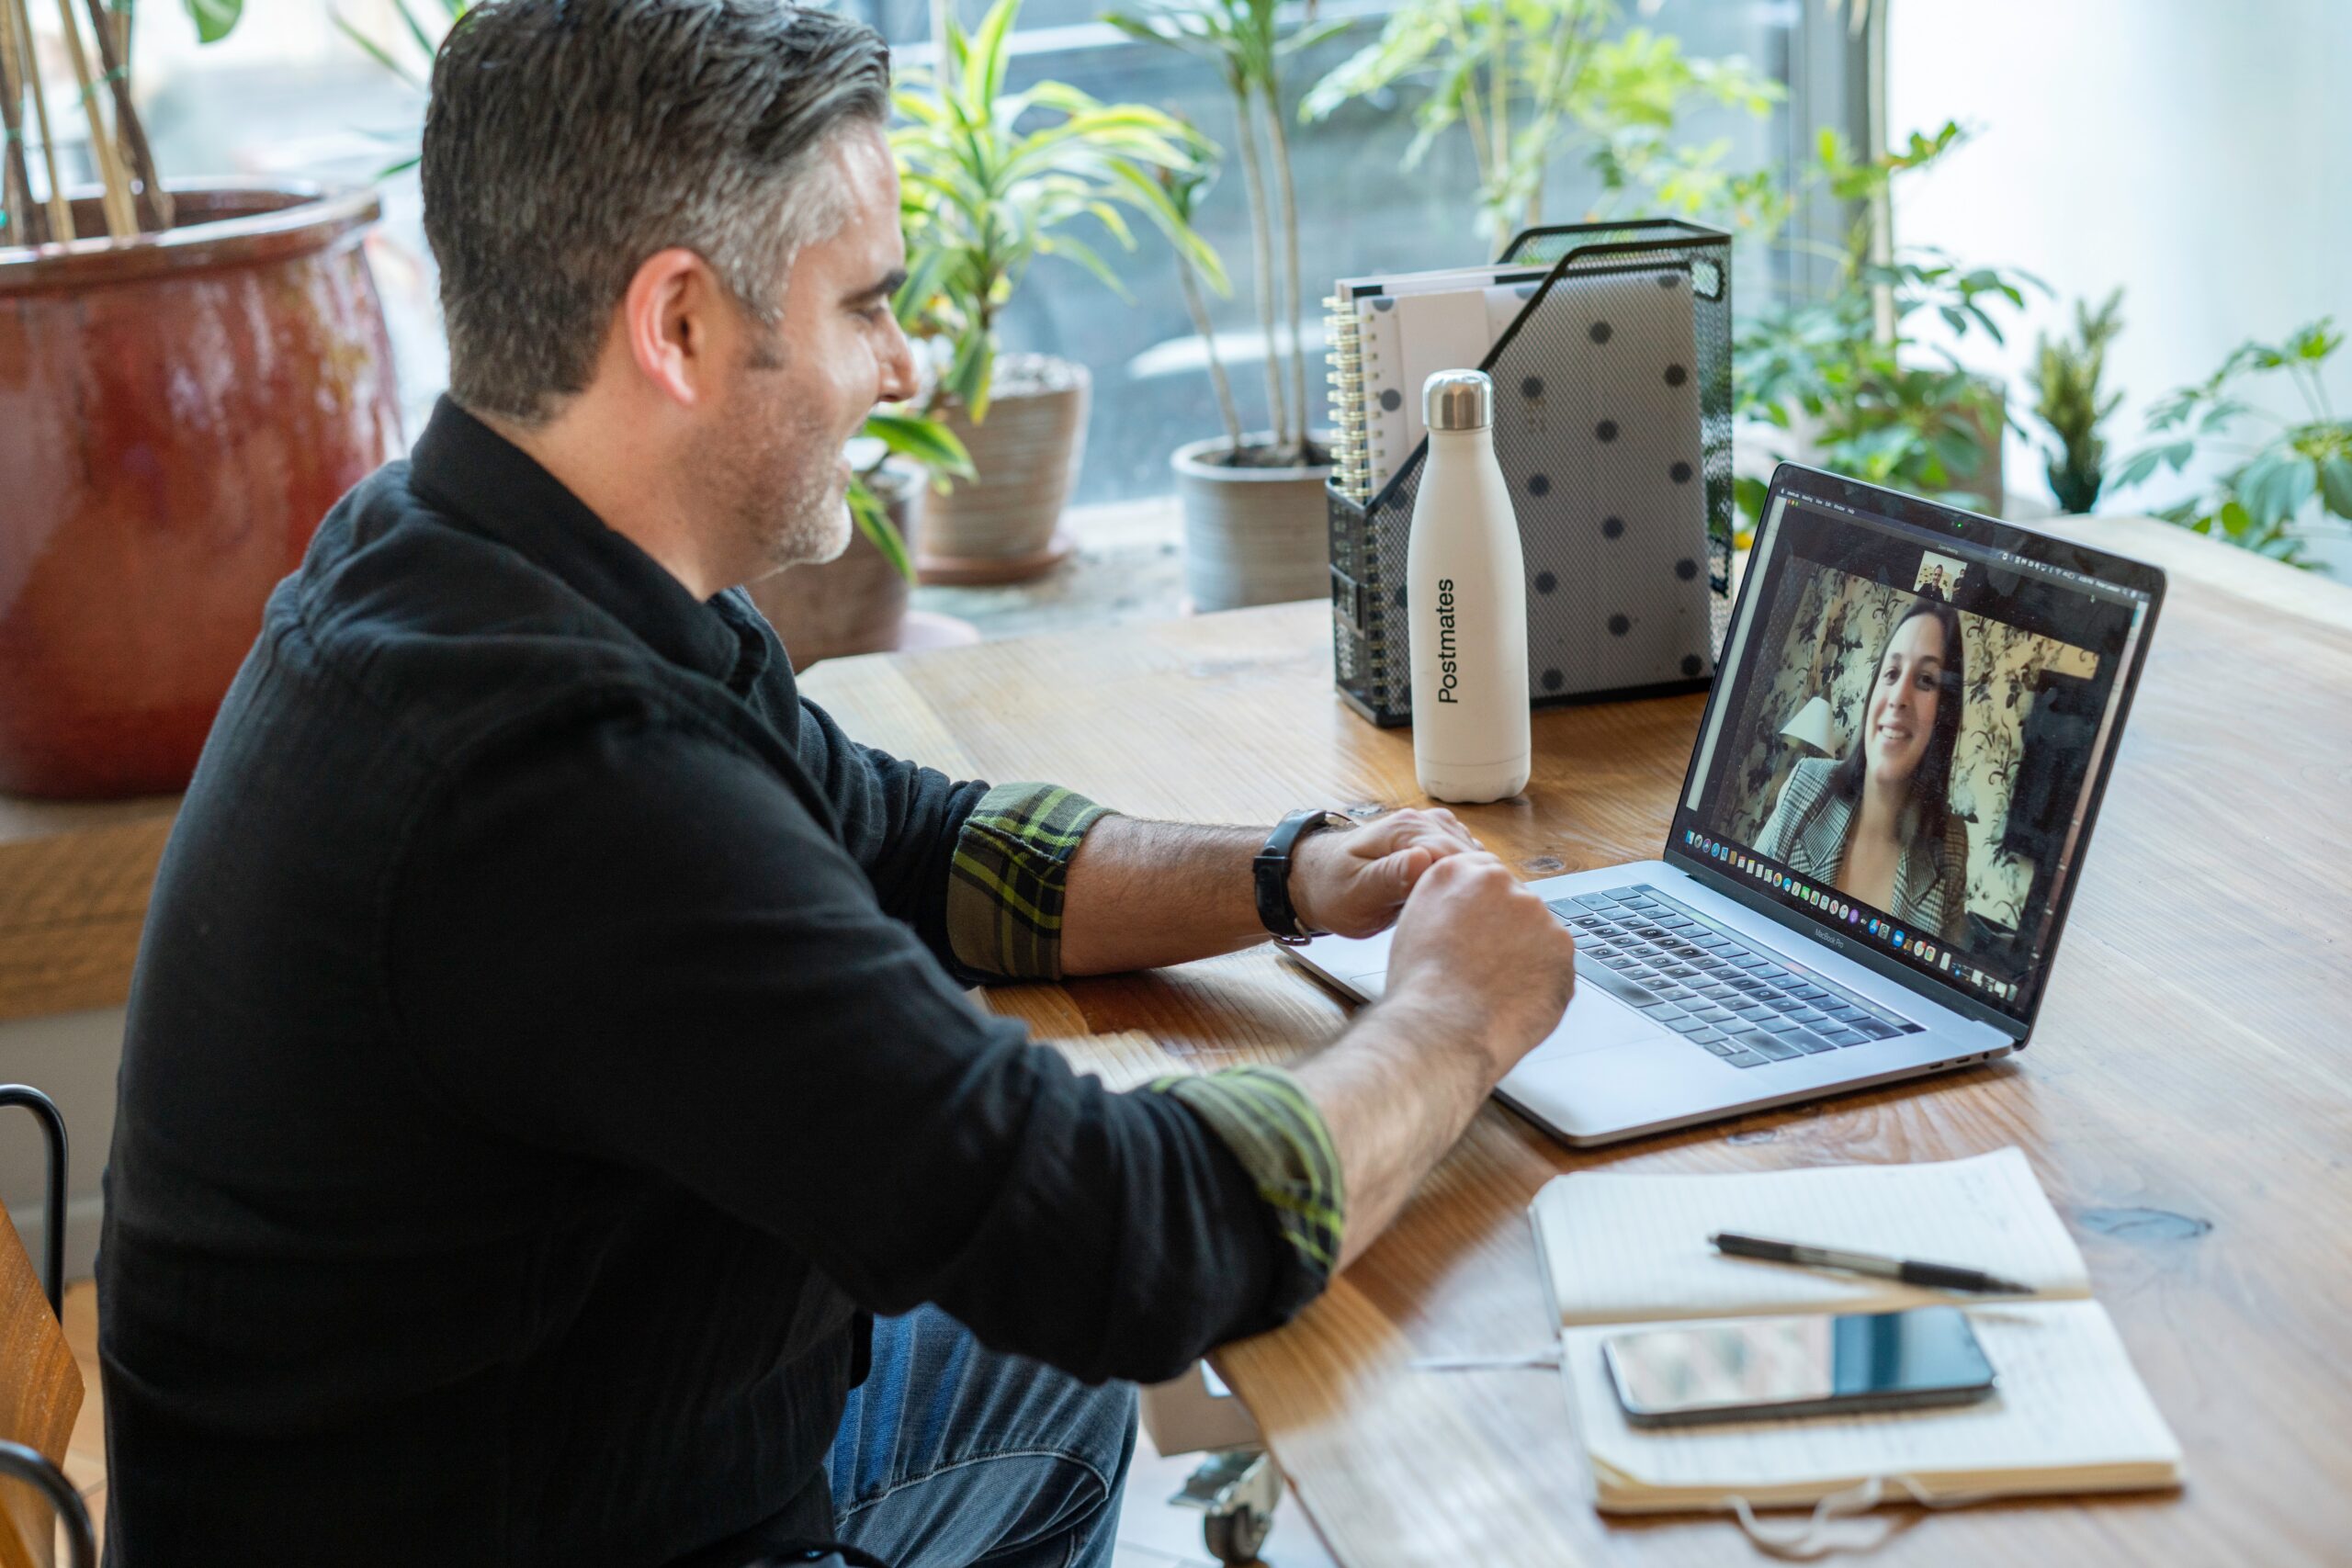 How to Have Effective Online Meetings with your Remote Team